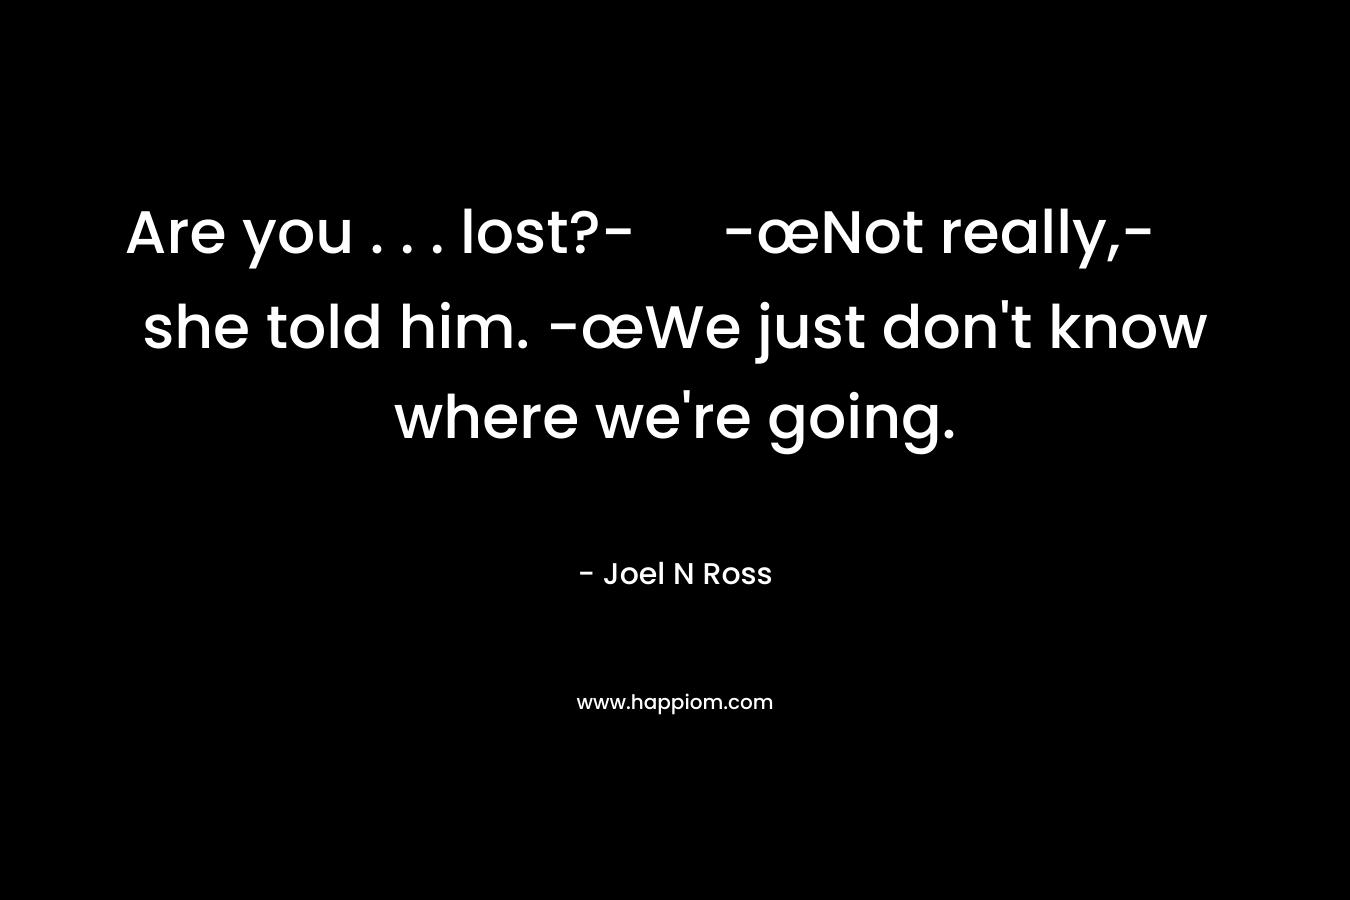 Are you . . . lost?- -œNot really,- she told him. -œWe just don't know where we're going.